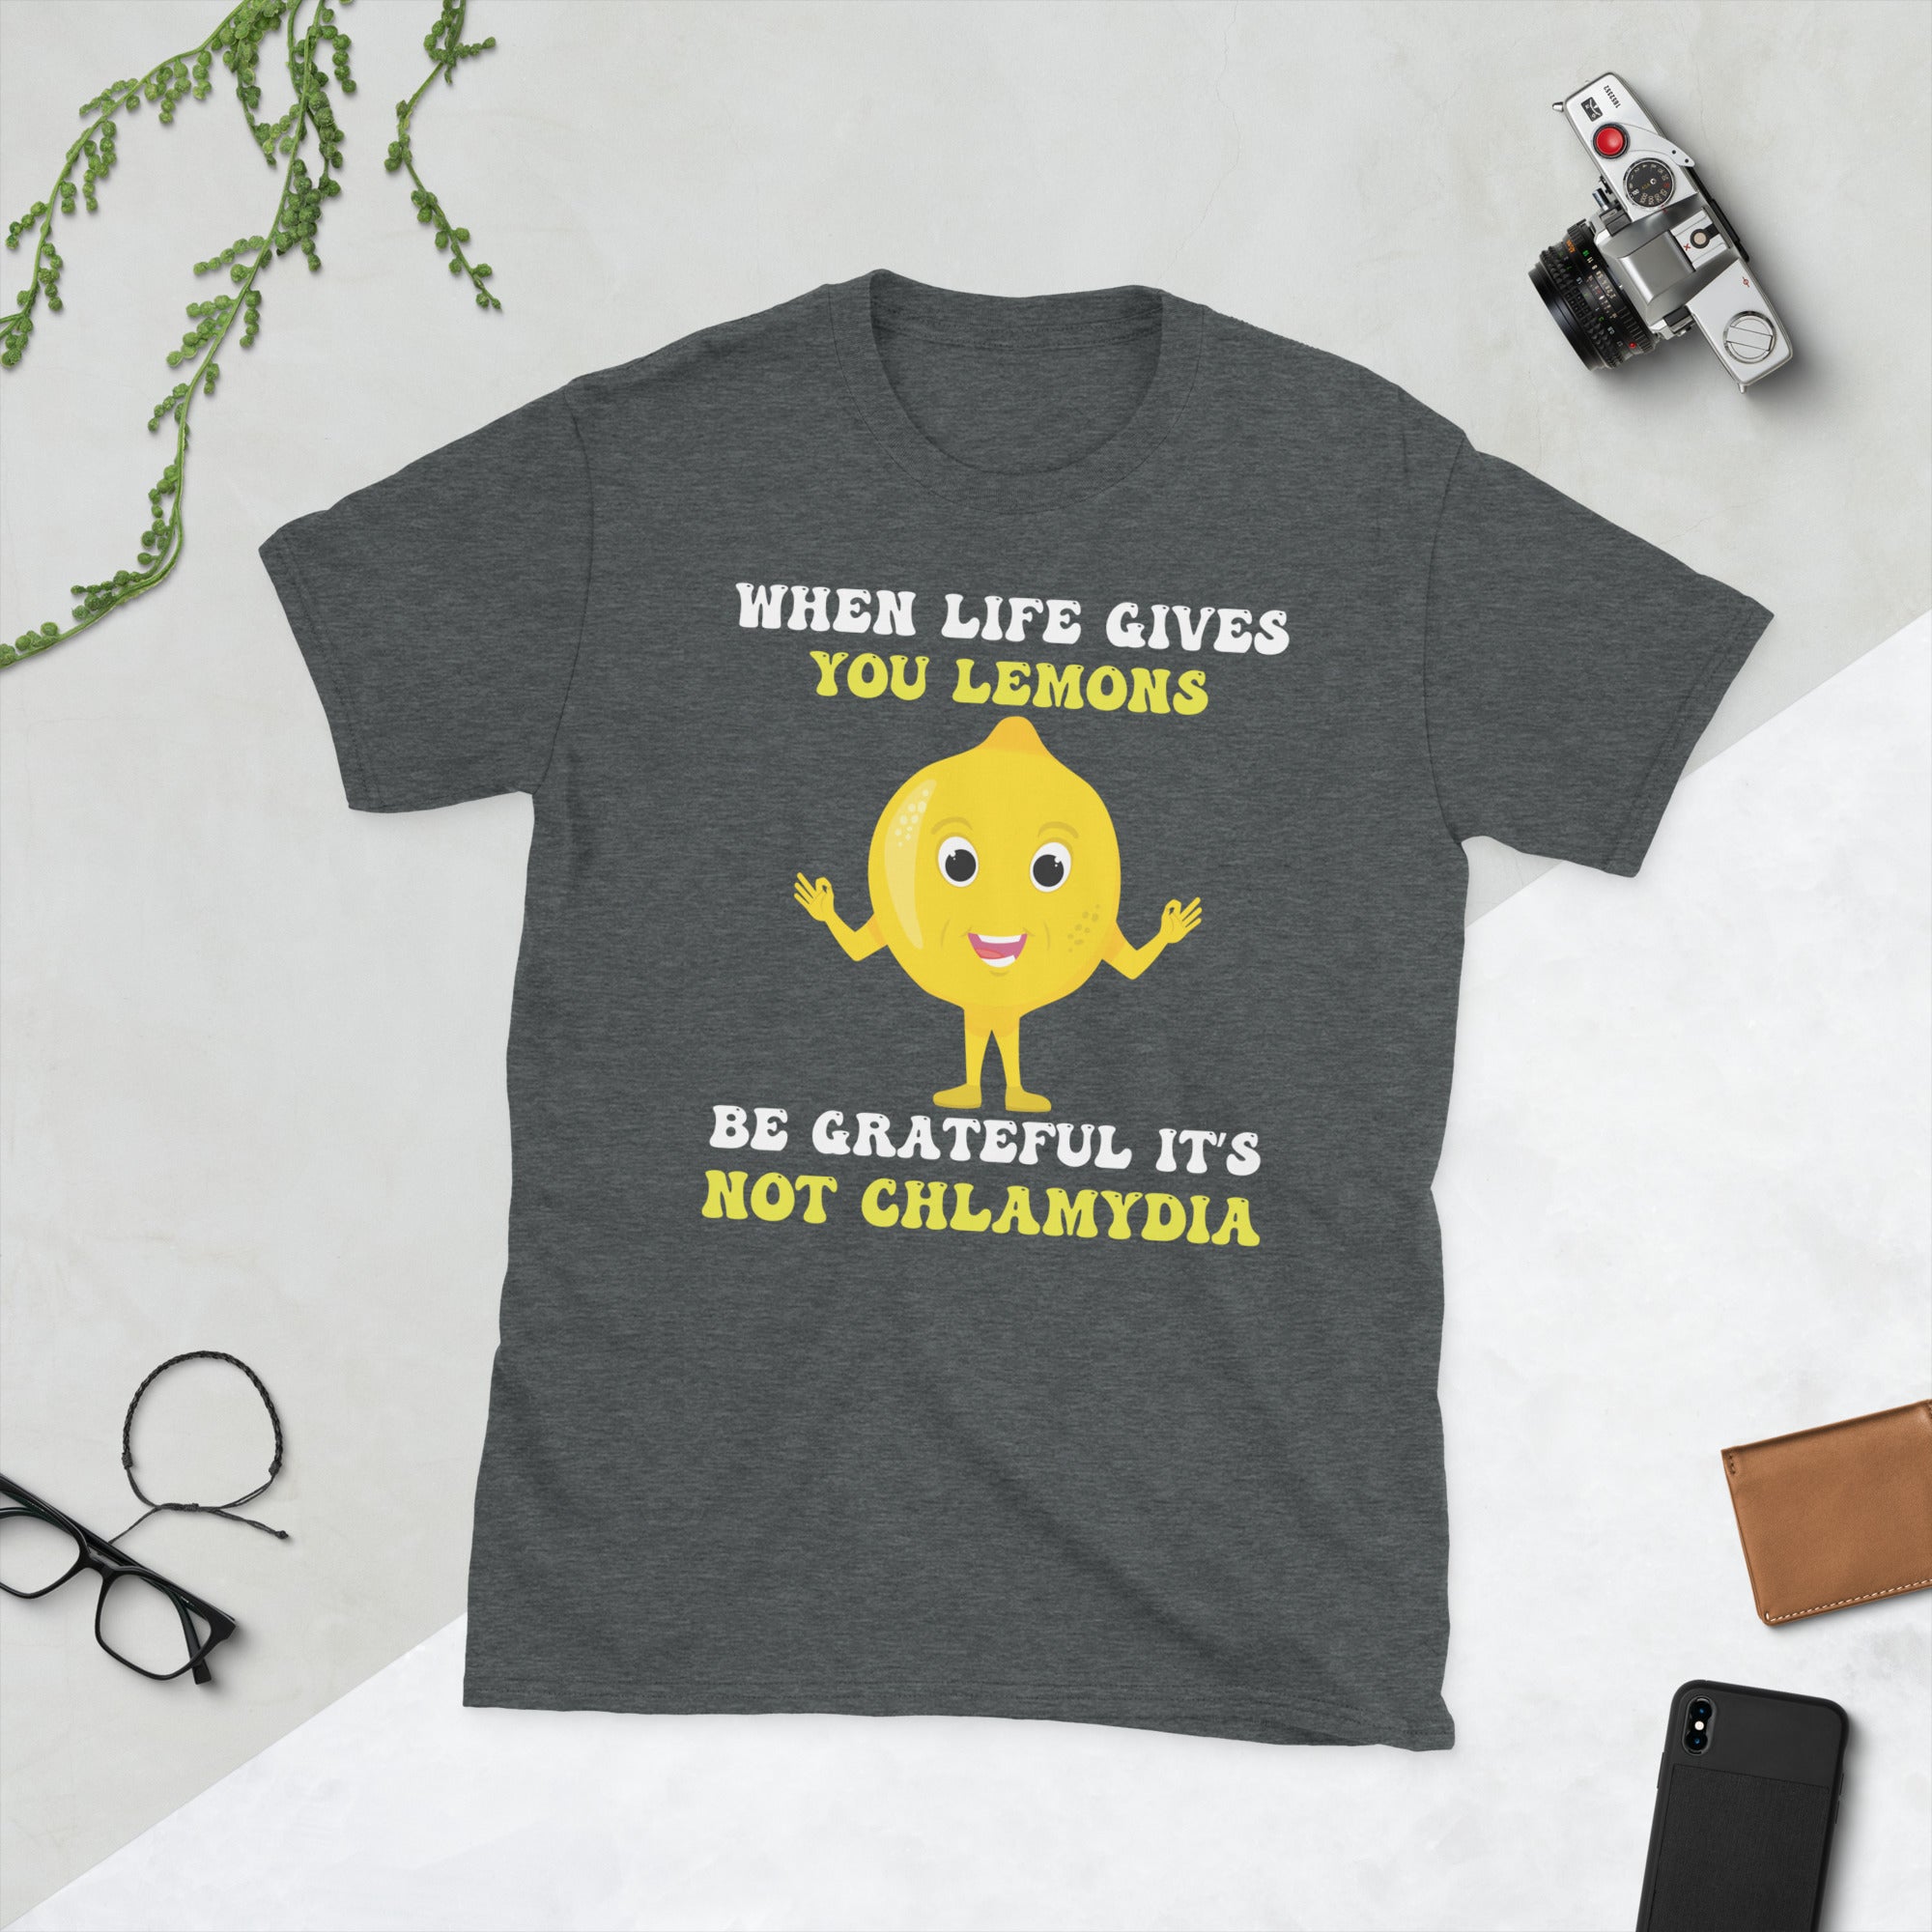 When Life Gives You Lemons, Be Grateful Its Not Chlamydia, Funny Gift, Sarcastic Shirt, Funny Rude Shirt, Inappropriate Shirt, Offensive Tee - Madeinsea©